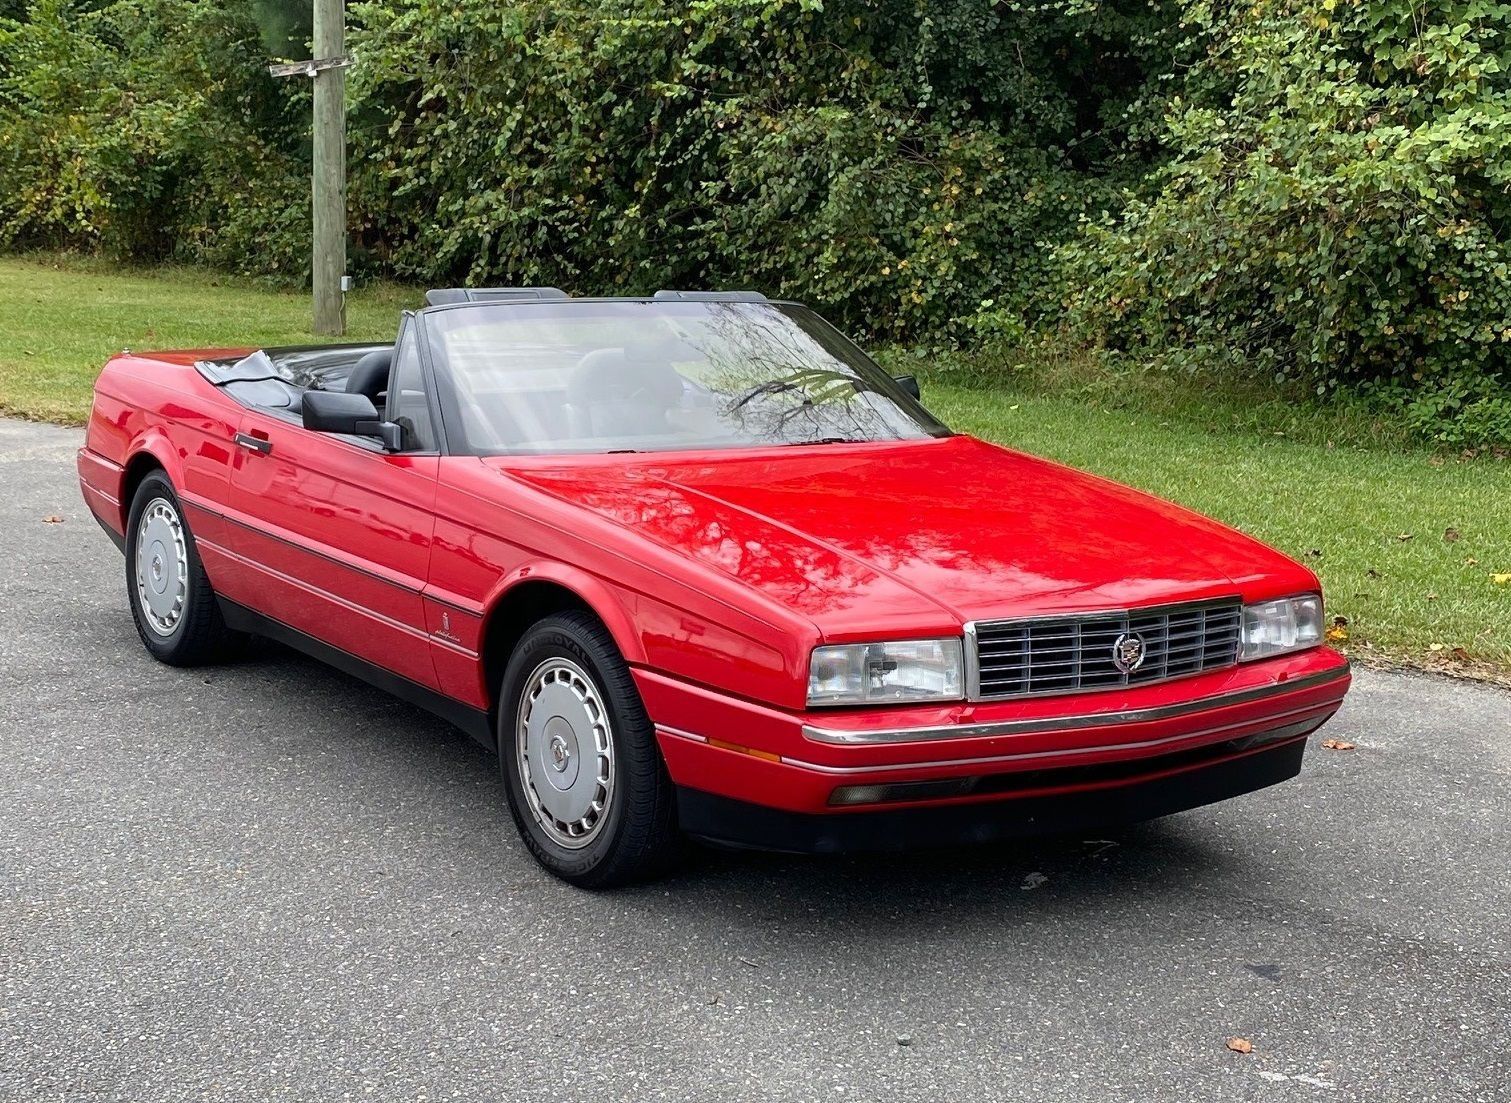 frontal side view of a 1990 convertible Cadillac Allante